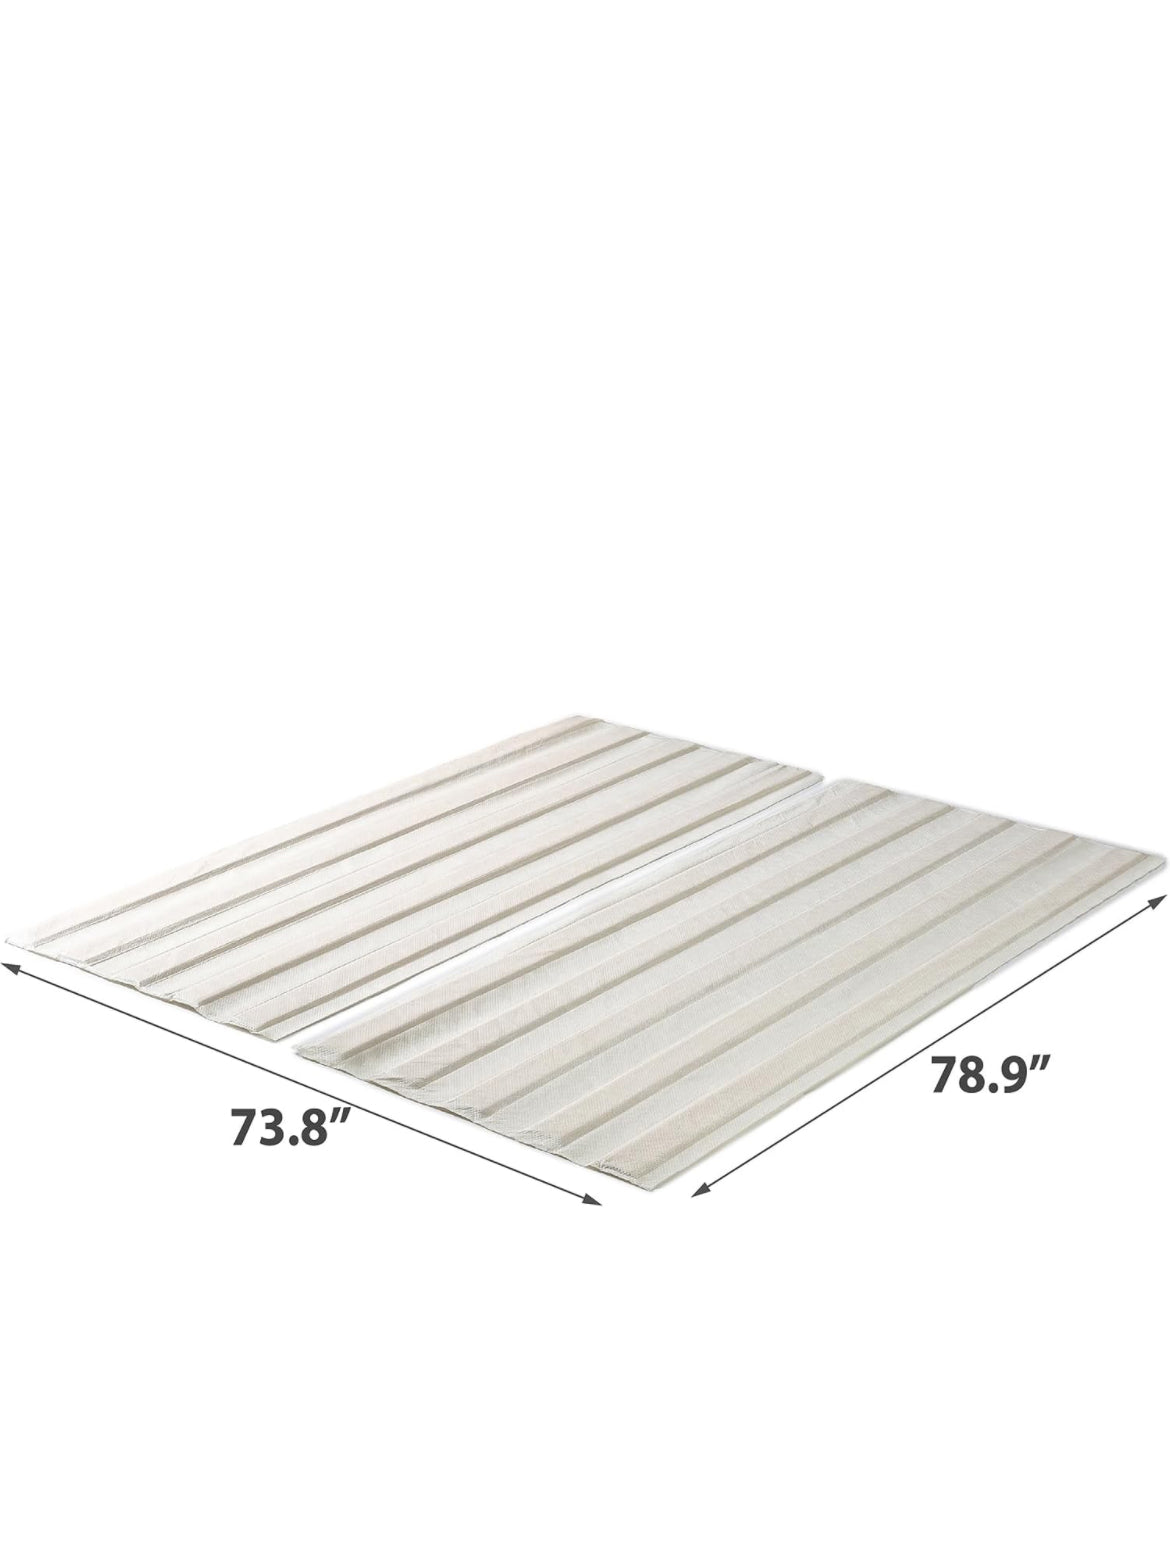 King Size - ZINUS Compack Fabric Covered Wood Slats, Bunkie Board, Box Spring Replacement, Natural, King